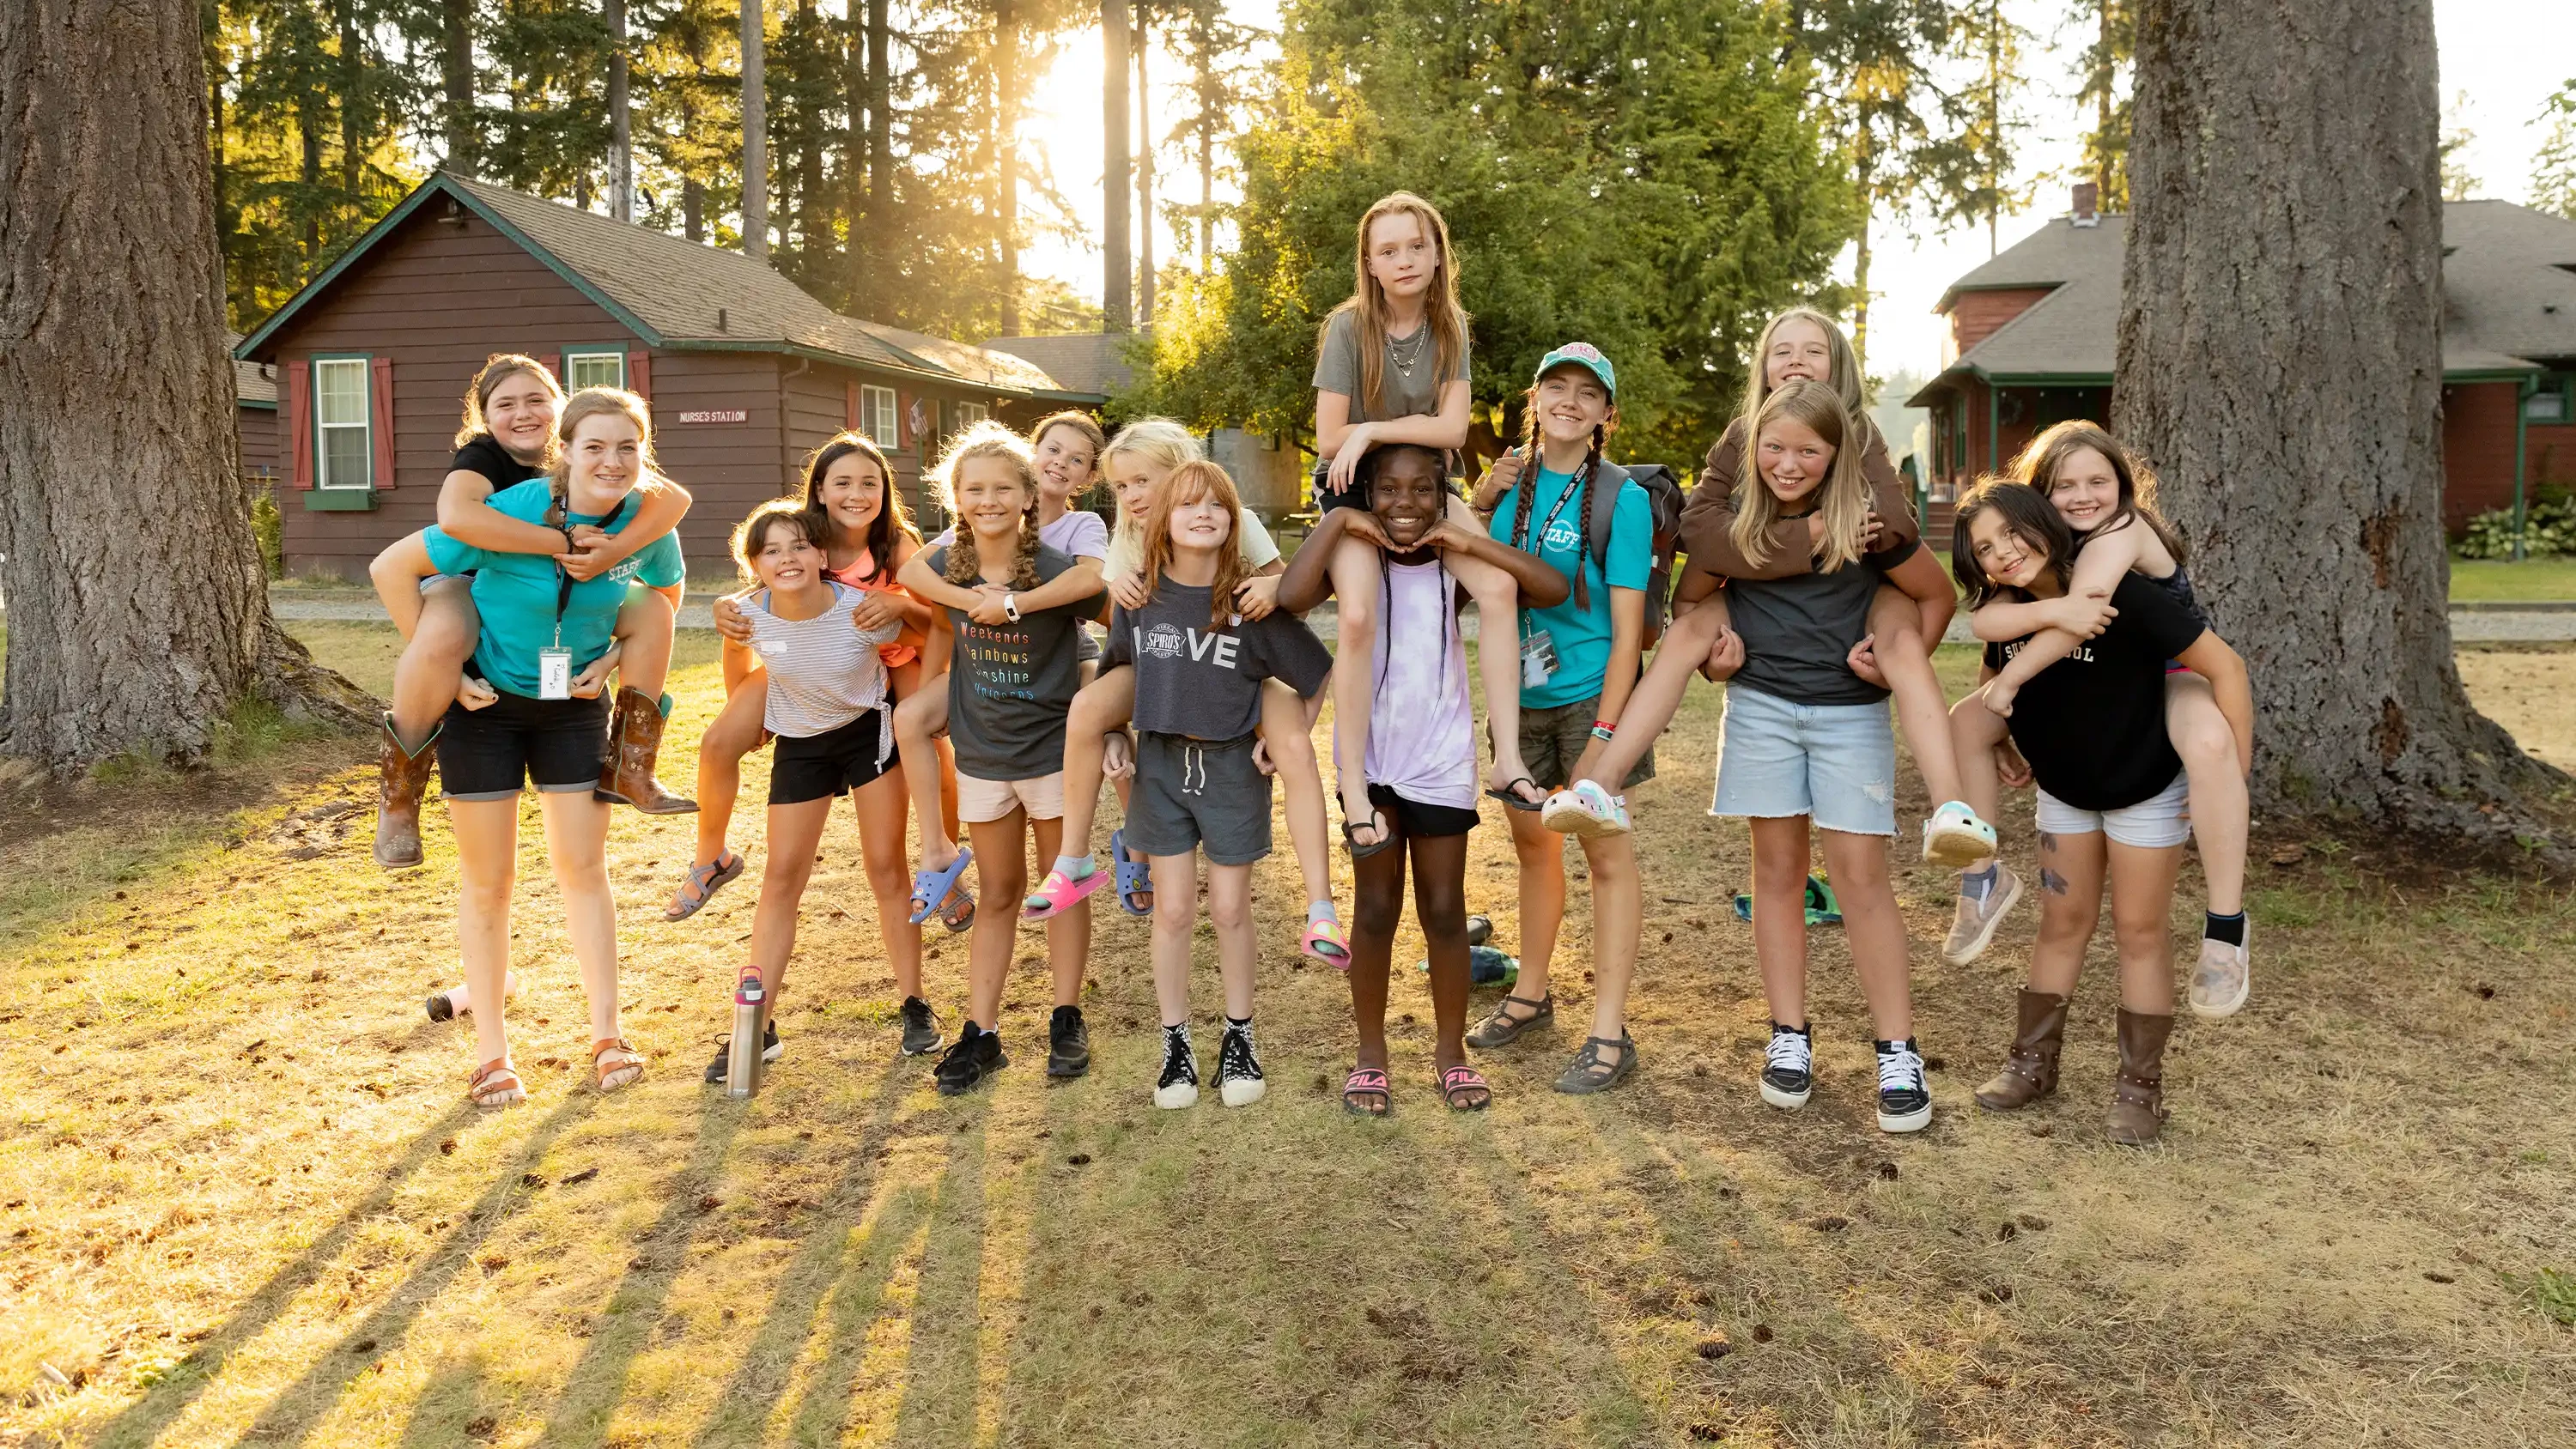 CRISTA Camps- Military Kids- Camp- Girls posing for picture at camp